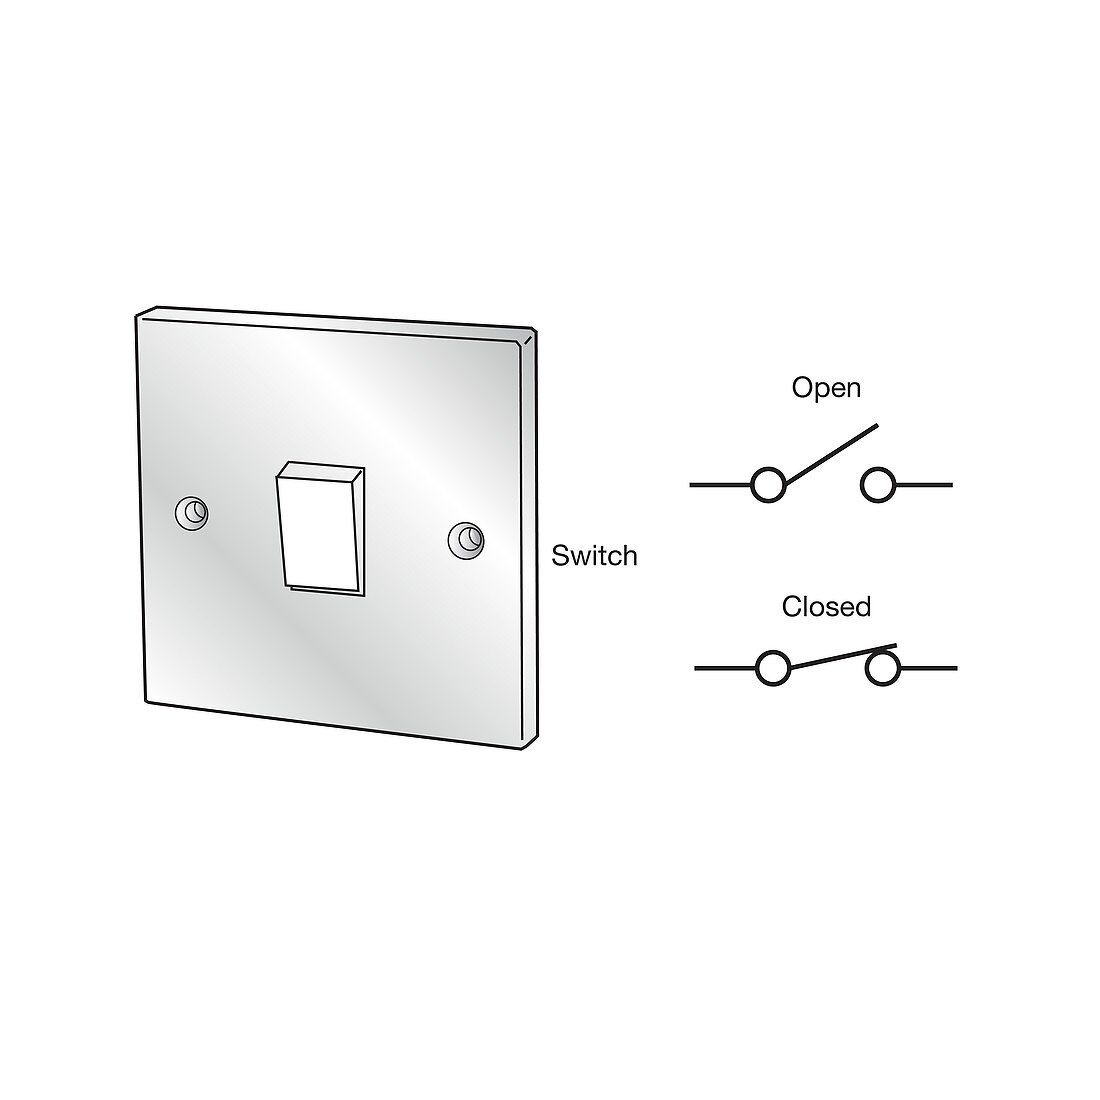 Electric switch and circuit symbol, illustration